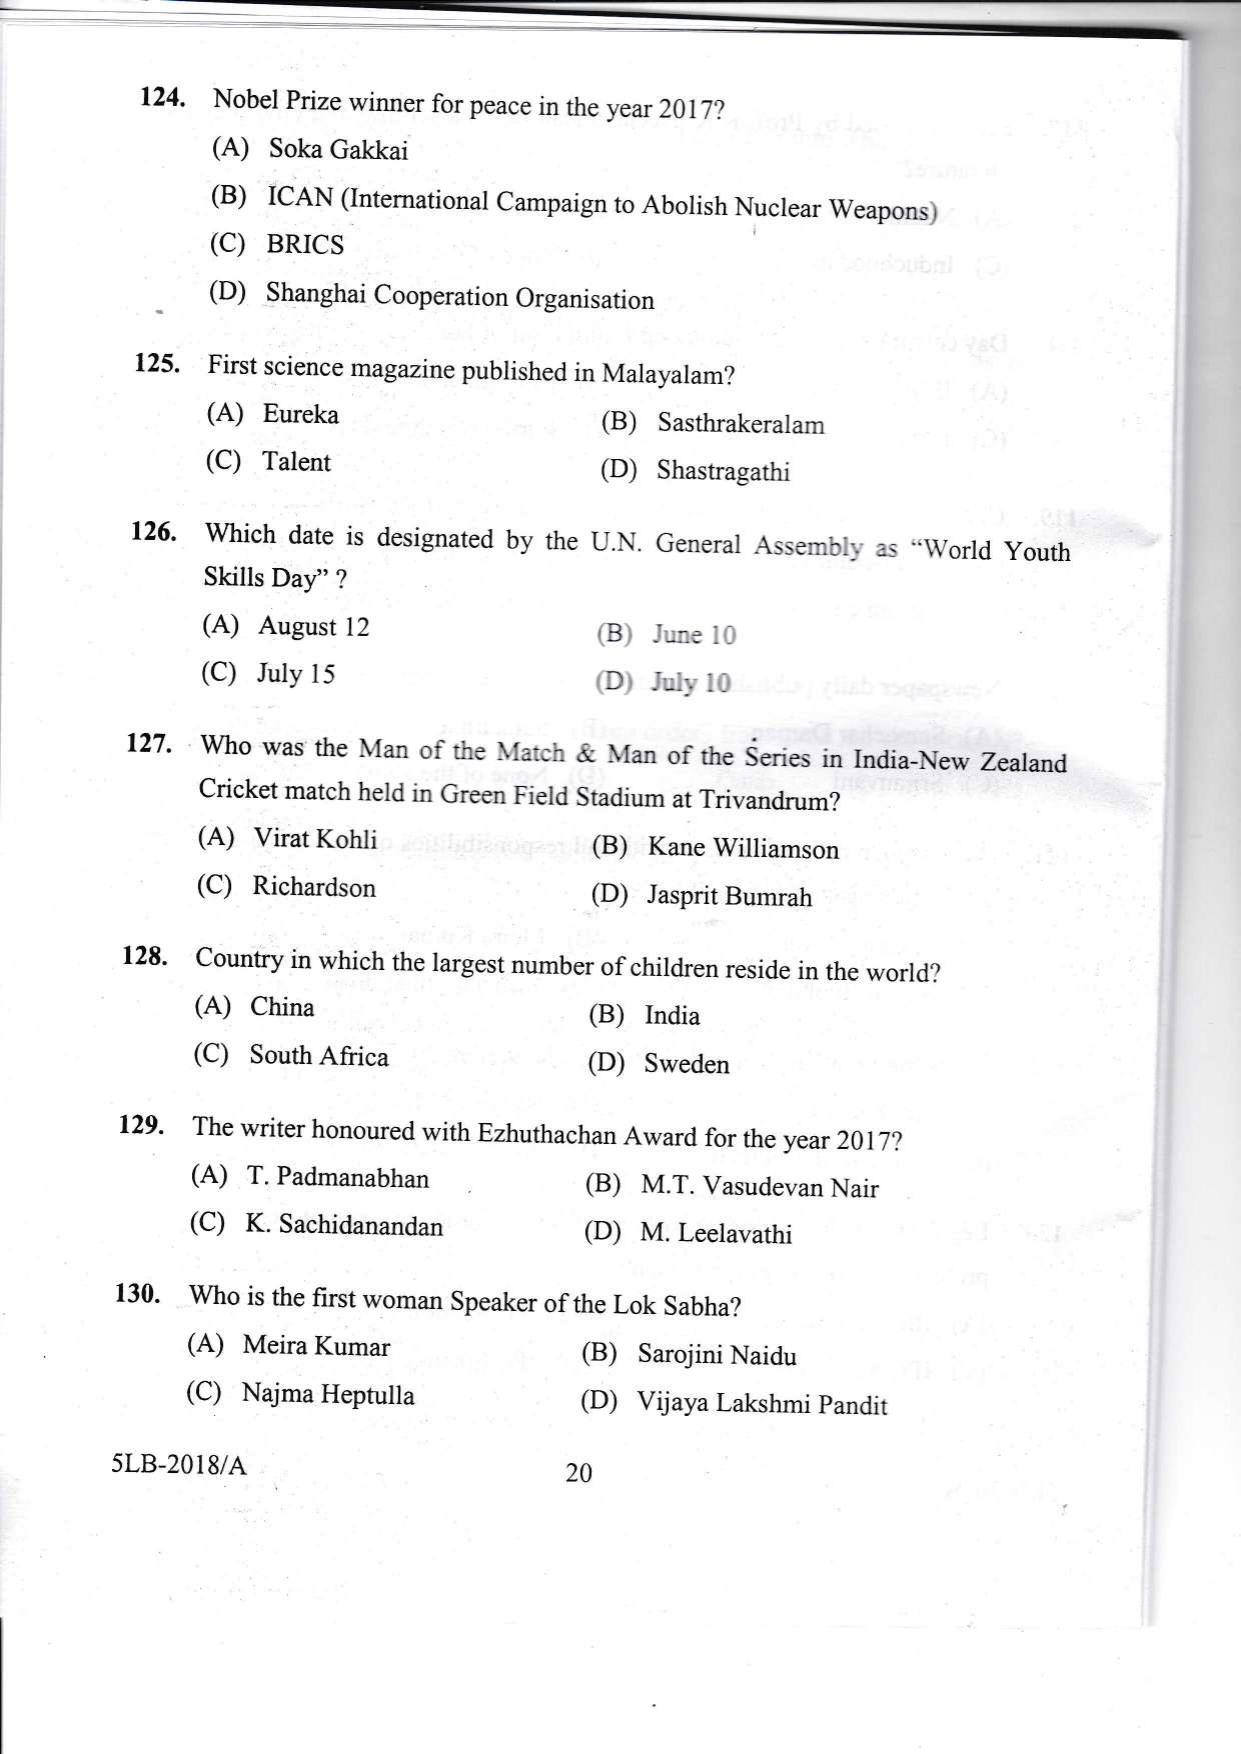 KLEE 5 Year LLB Exam 2018 Question Paper - Page 20